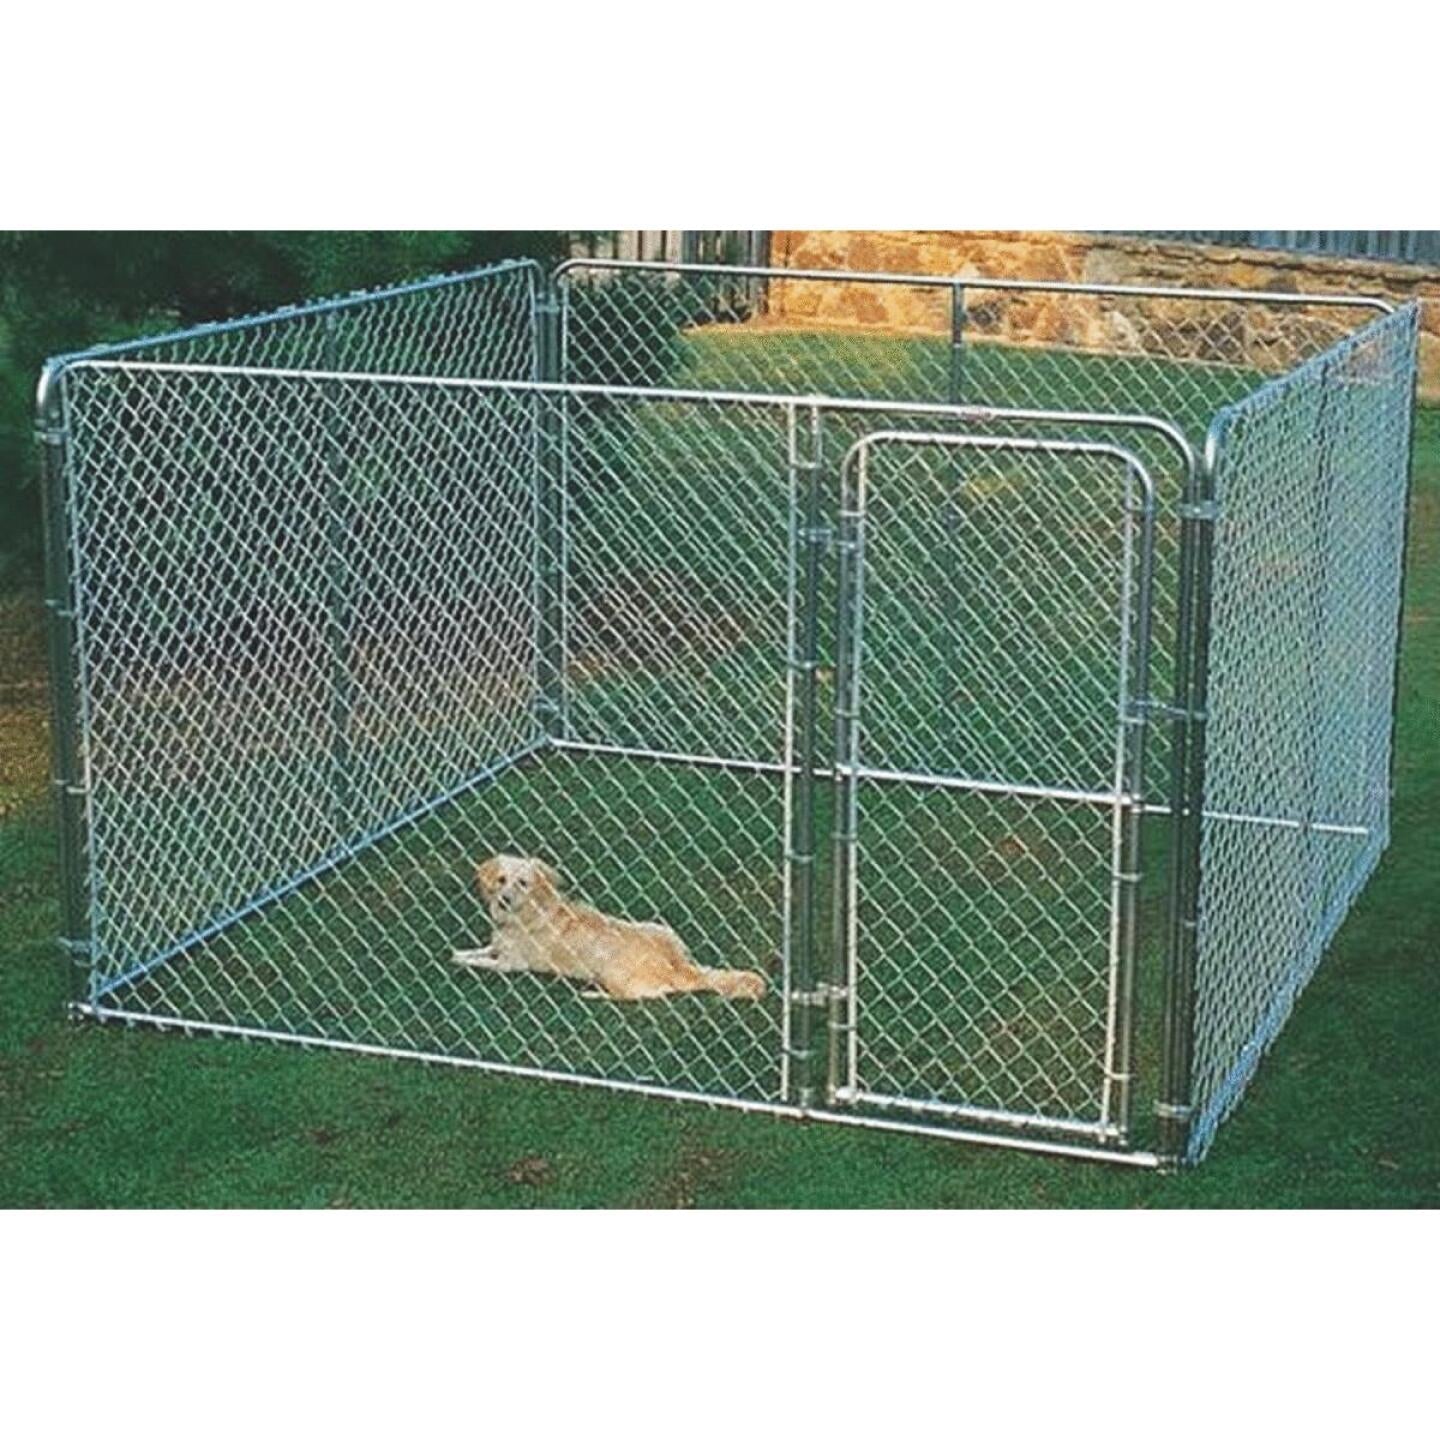 Fence Master, Fence Master Silver Series 10 Ft. W. x 6 Ft. H. x 10 Ft. L. Steel Outdoor Pet Kennel